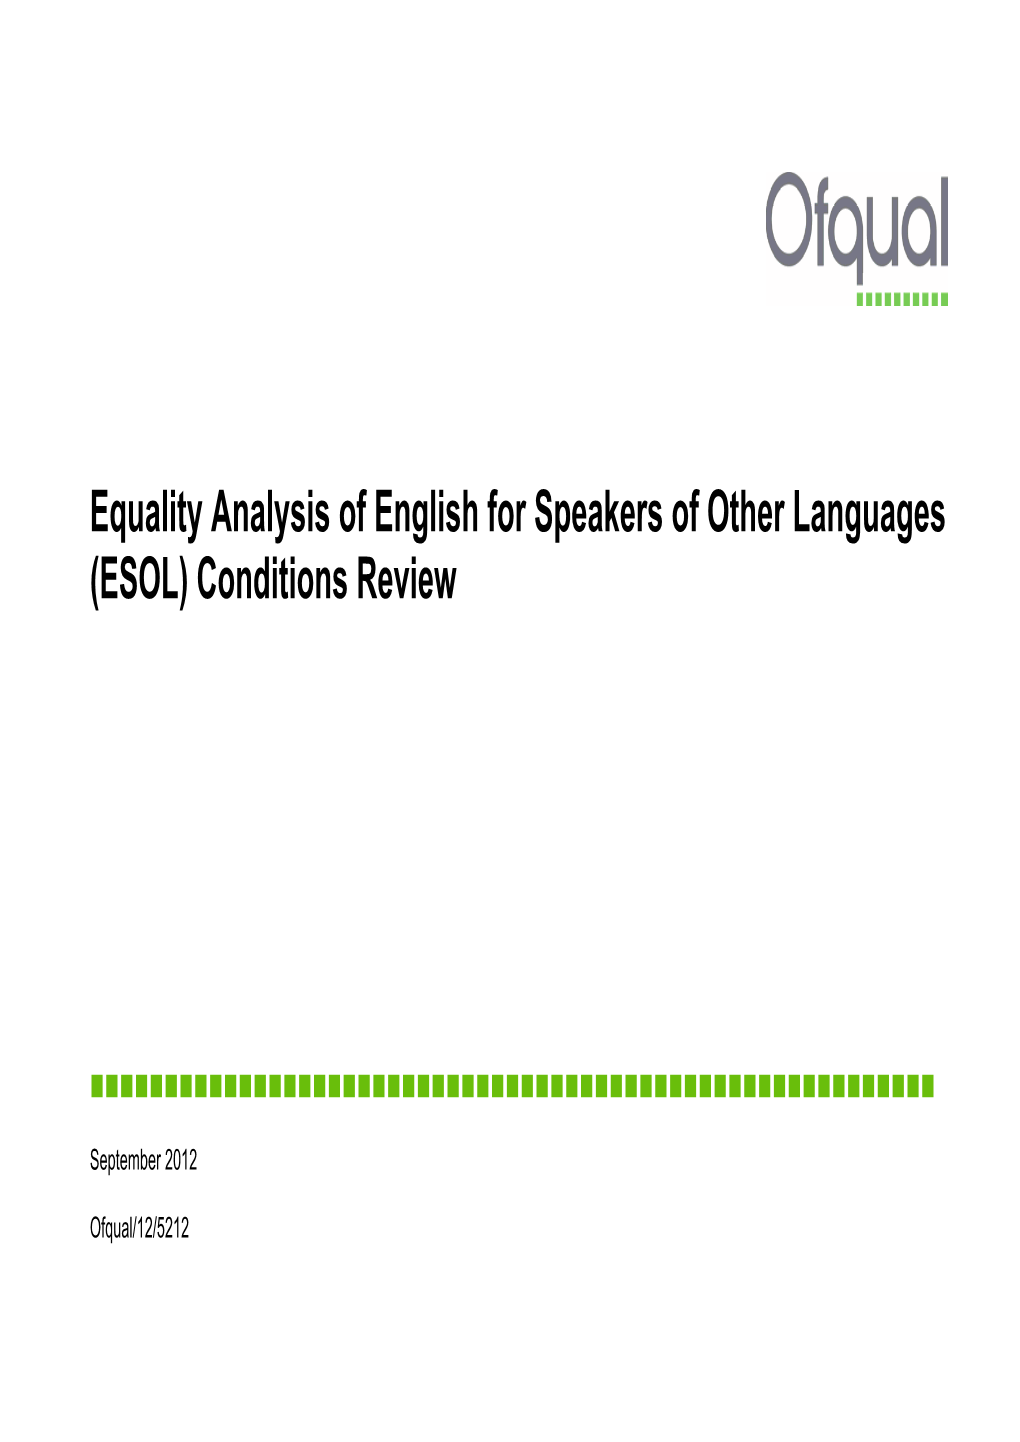 ESOL) Conditions Review